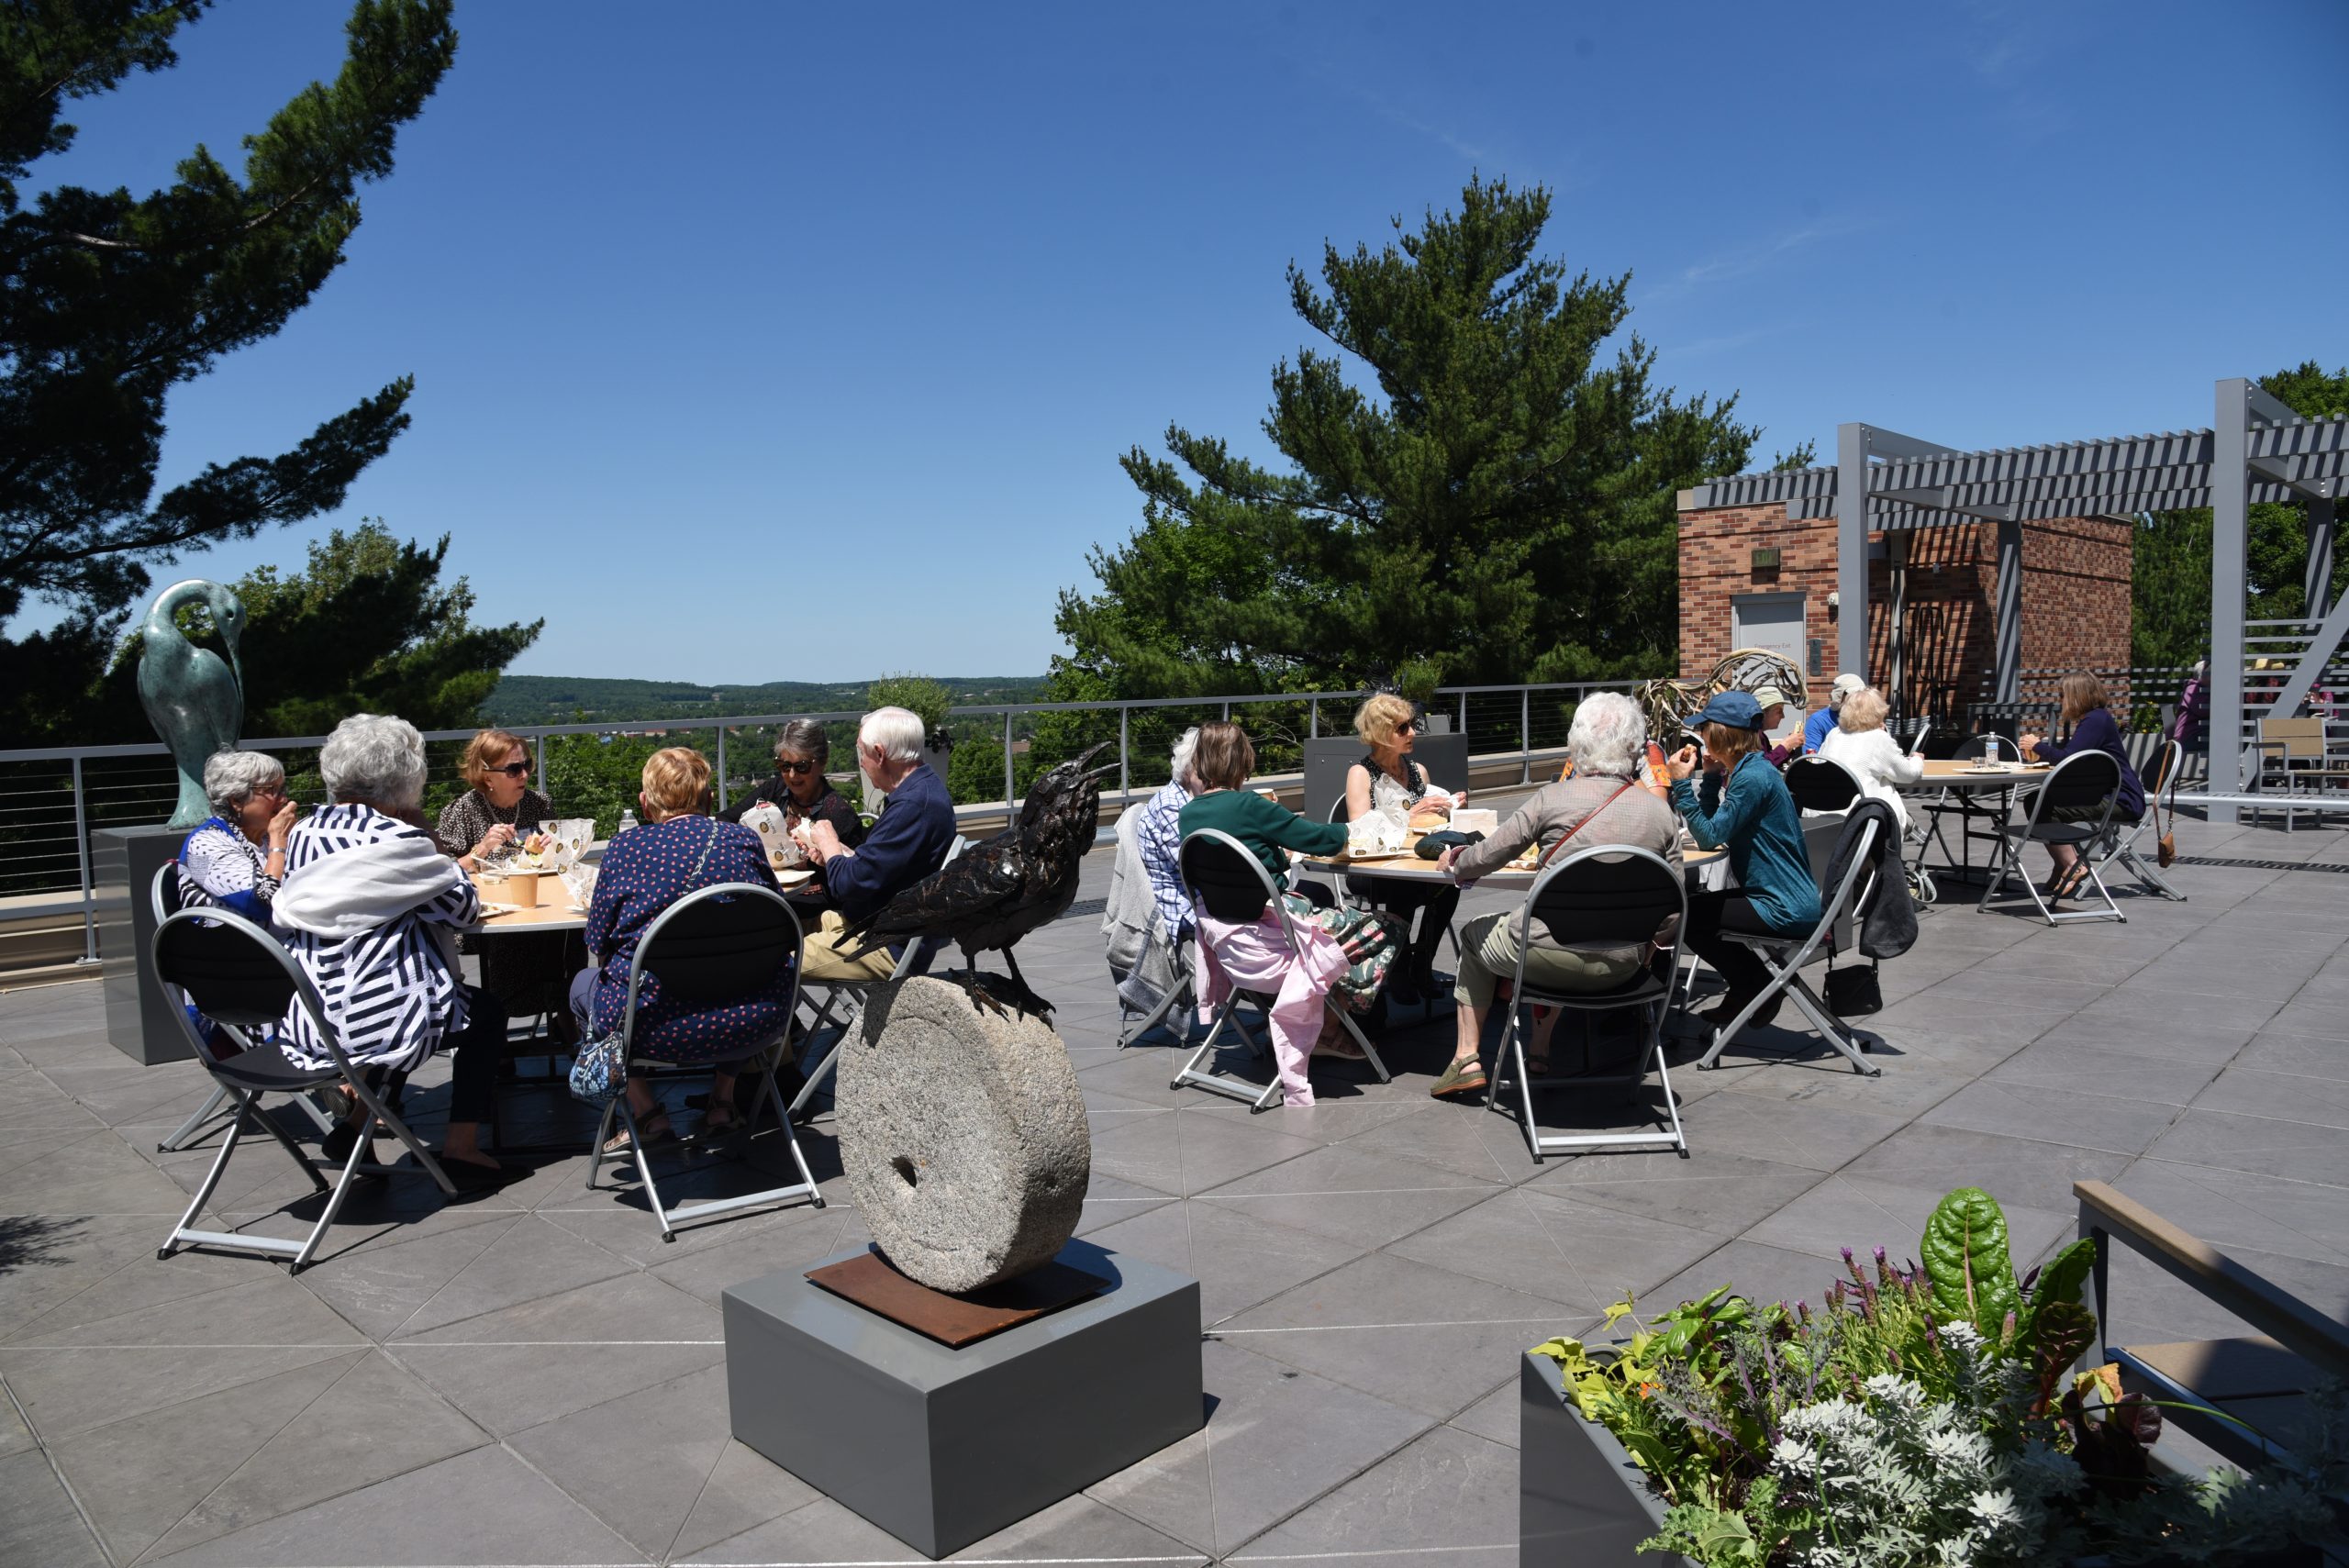 People converse during lunch, seated at tables in a rooftop sculpture garden on a sunny day with blue sky and trees in the background.